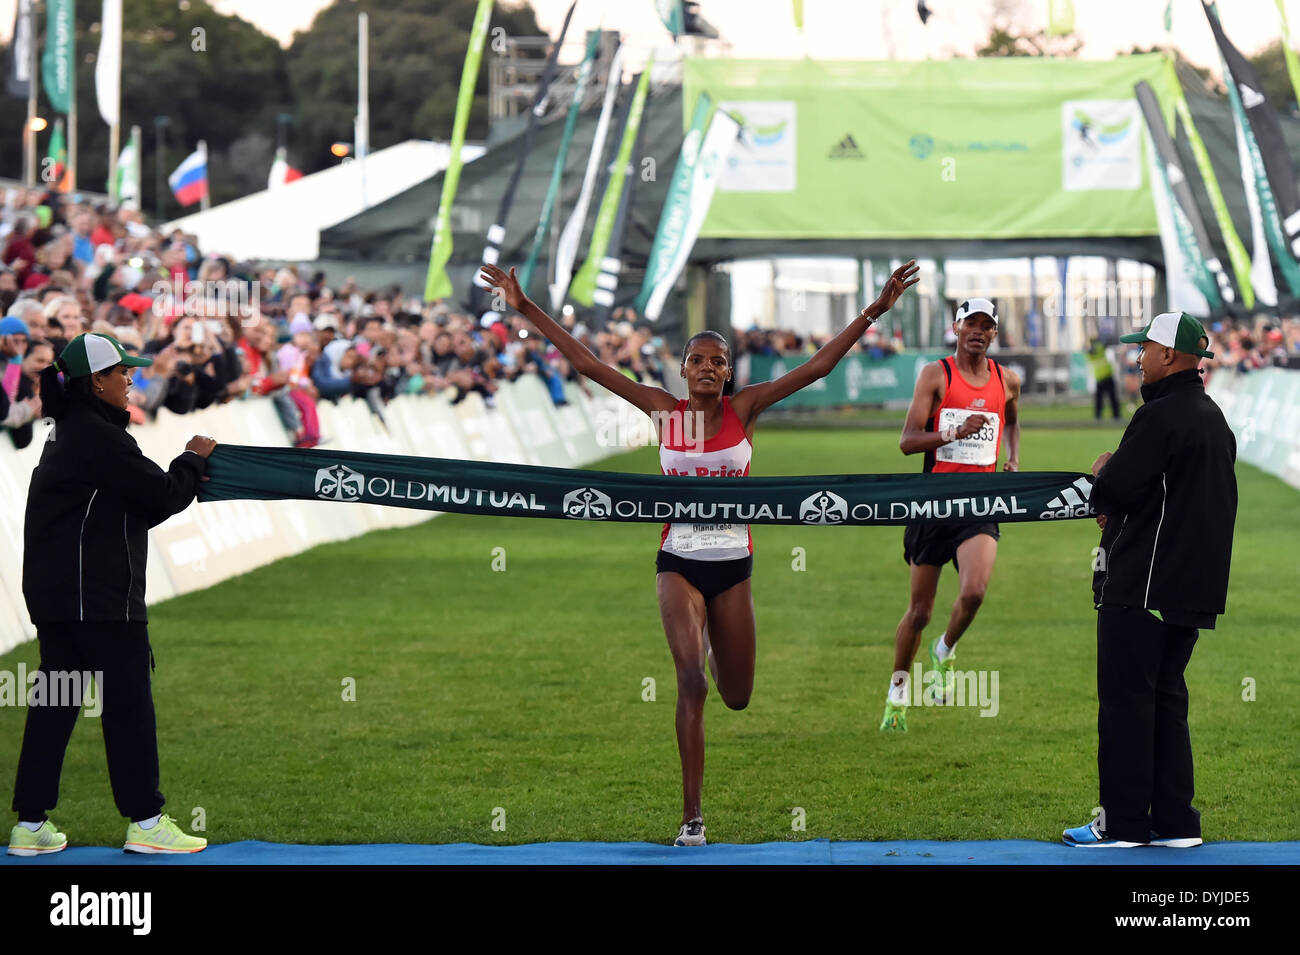 CAPE TOWN, South Africa - Saturday 19 April 2014, Diana Lebo Phalula (time 01:14:00) winning the Womens half marathon of the Old Mutual Two Oceans Marathon.  Photo by Roger Sedres/ ImageSA/Alamy Live News Stock Photo